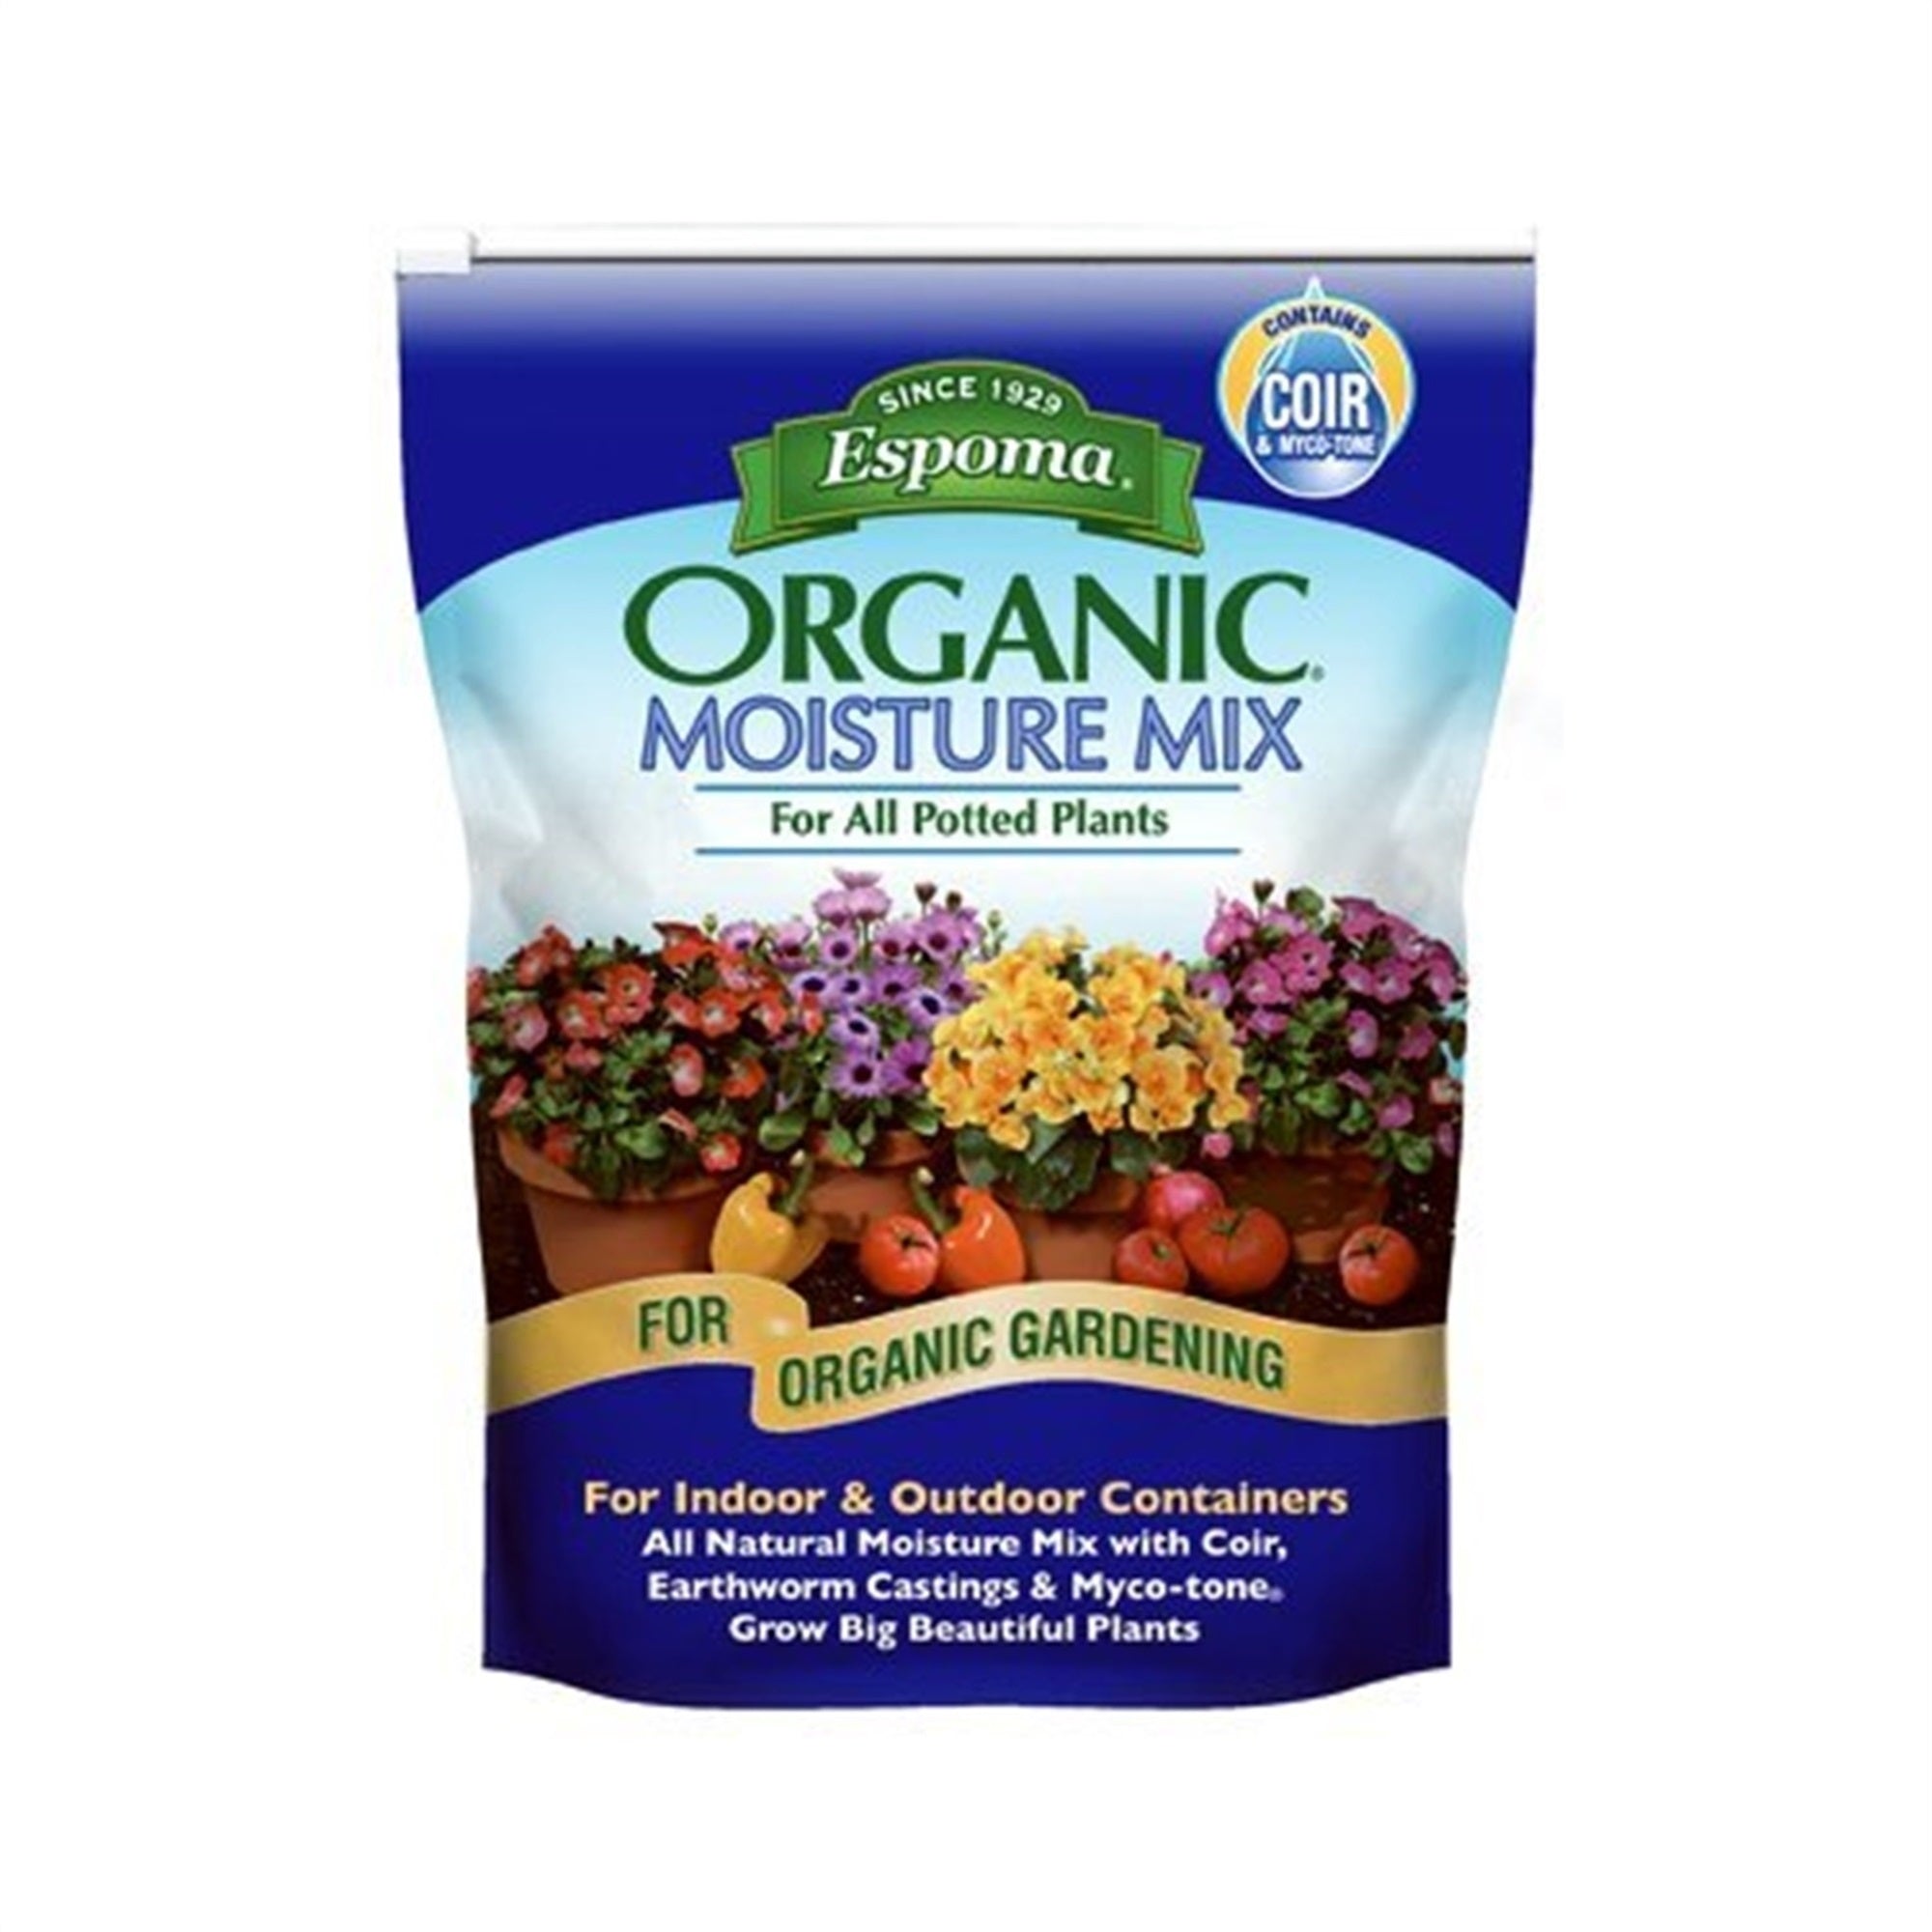 Espoma Organic Moisture Mix with Coir & Myco-tone for All Indoor and Outdoor Potted Plants, for Organic Gardening